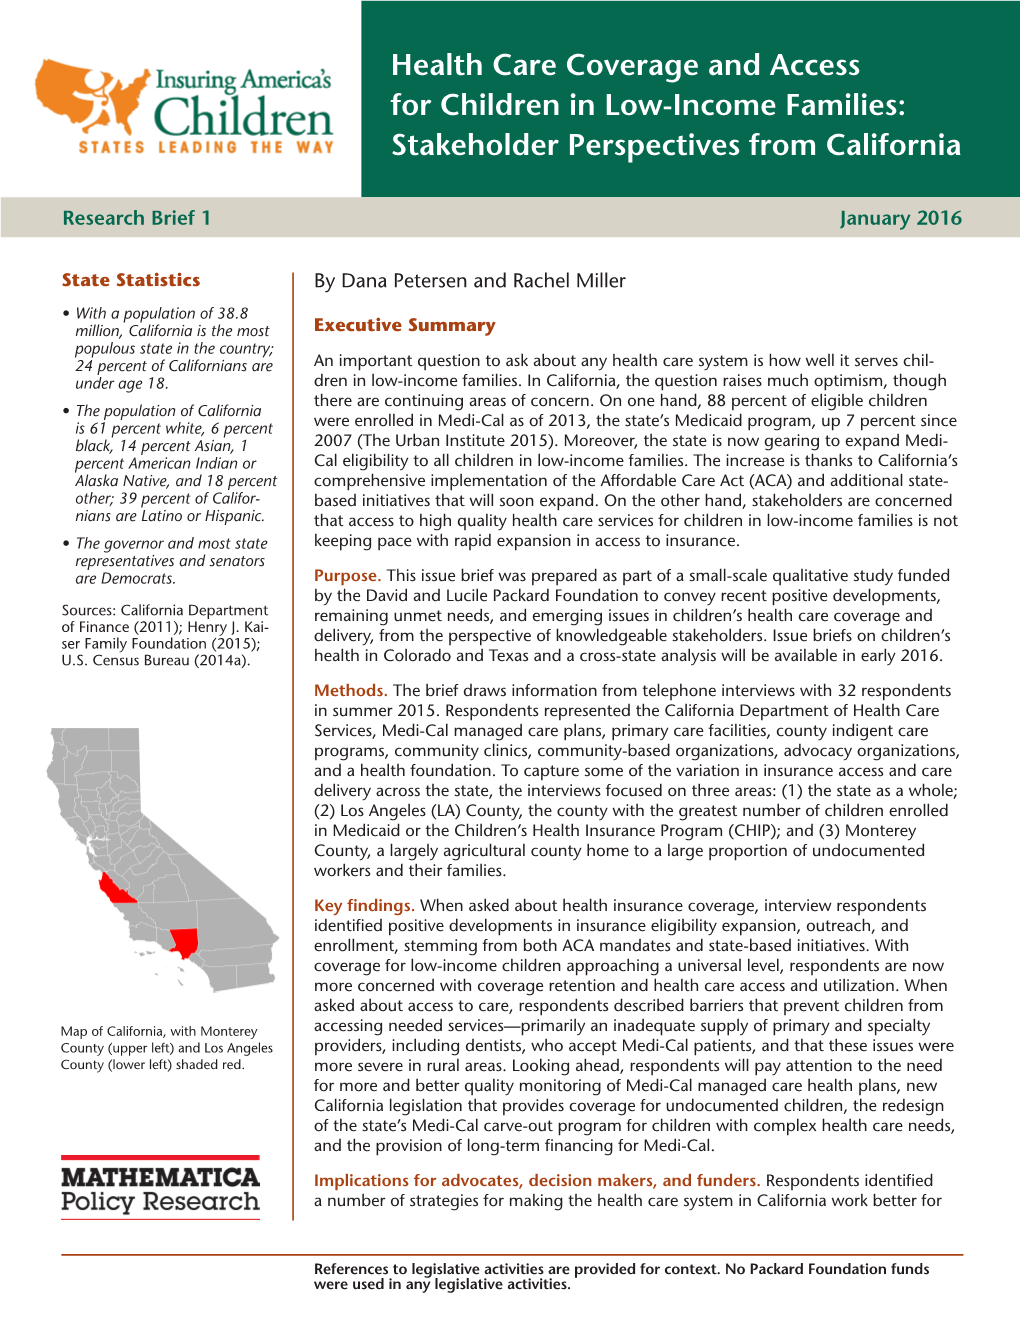 Health Care Coverage and Access for Children in Low-Income Families: Stakeholder Perspectives from California